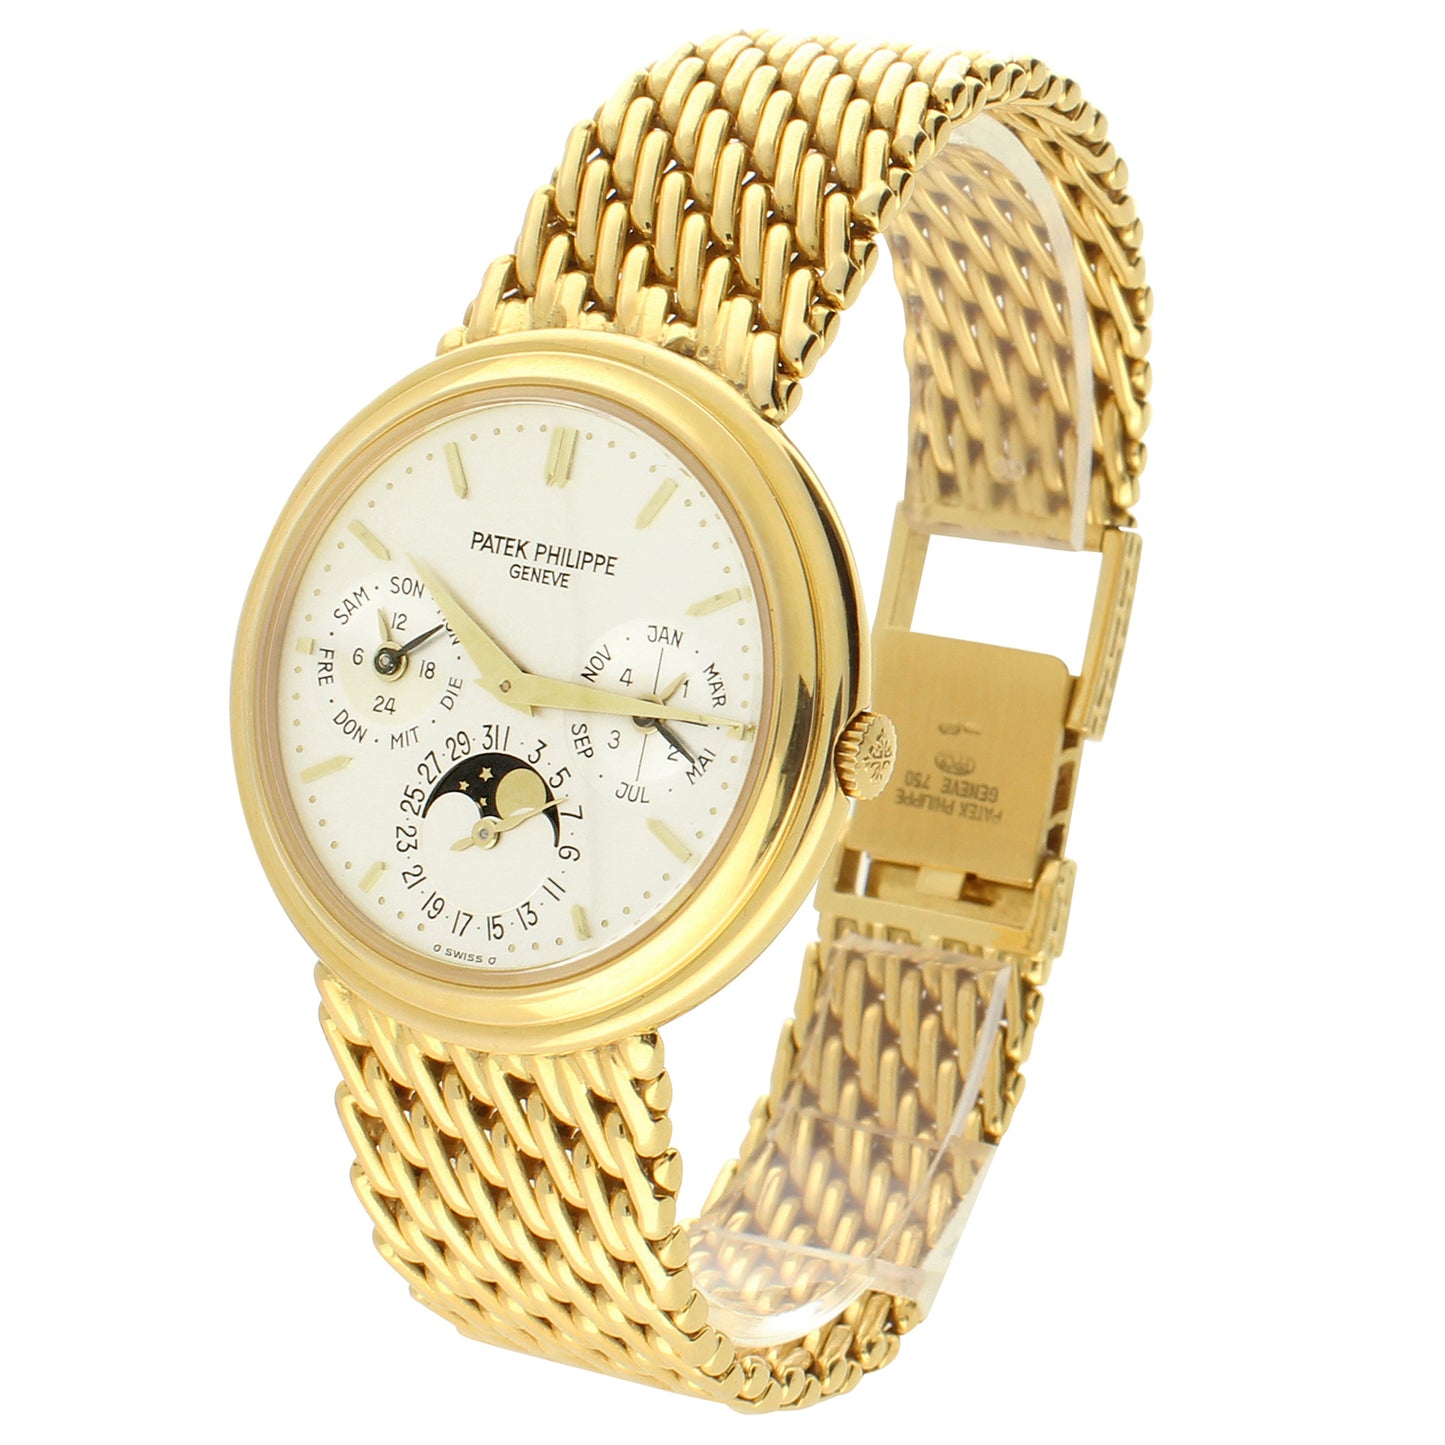 18ct yellow gold, reference 3945, perpetual calendar wristwatch with moon phases and leap year indicator. Made 1993